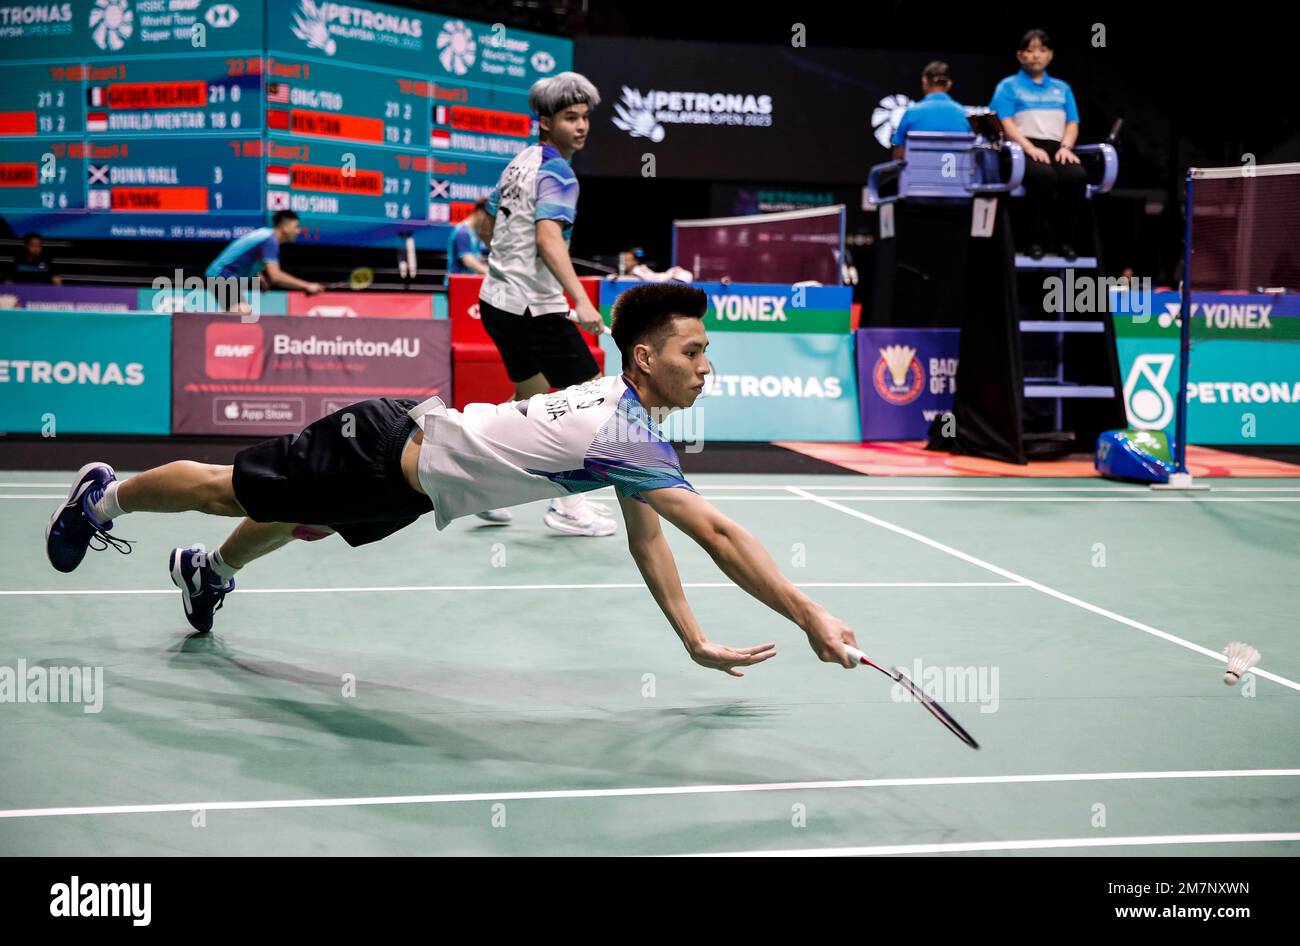 Kuala Lumpur, Malaysia. 10th Jan, 2023. Ong Yew Sin and Teo Ee Yi of Malaysia competes against Ren Xiang Yu and Tan Qiang of China during the Men's Doubles first round match of the Petronas Malaysia Open 2023 at Axiata Arena. Ong Yew Sin and Teo Ee Yi of Malaysia won with scores; 21/20/21 : 13/22/15. (Photo by Wong Fok Loy/SOPA Images/Sipa USA) Credit: Sipa USA/Alamy Live News Stock Photo